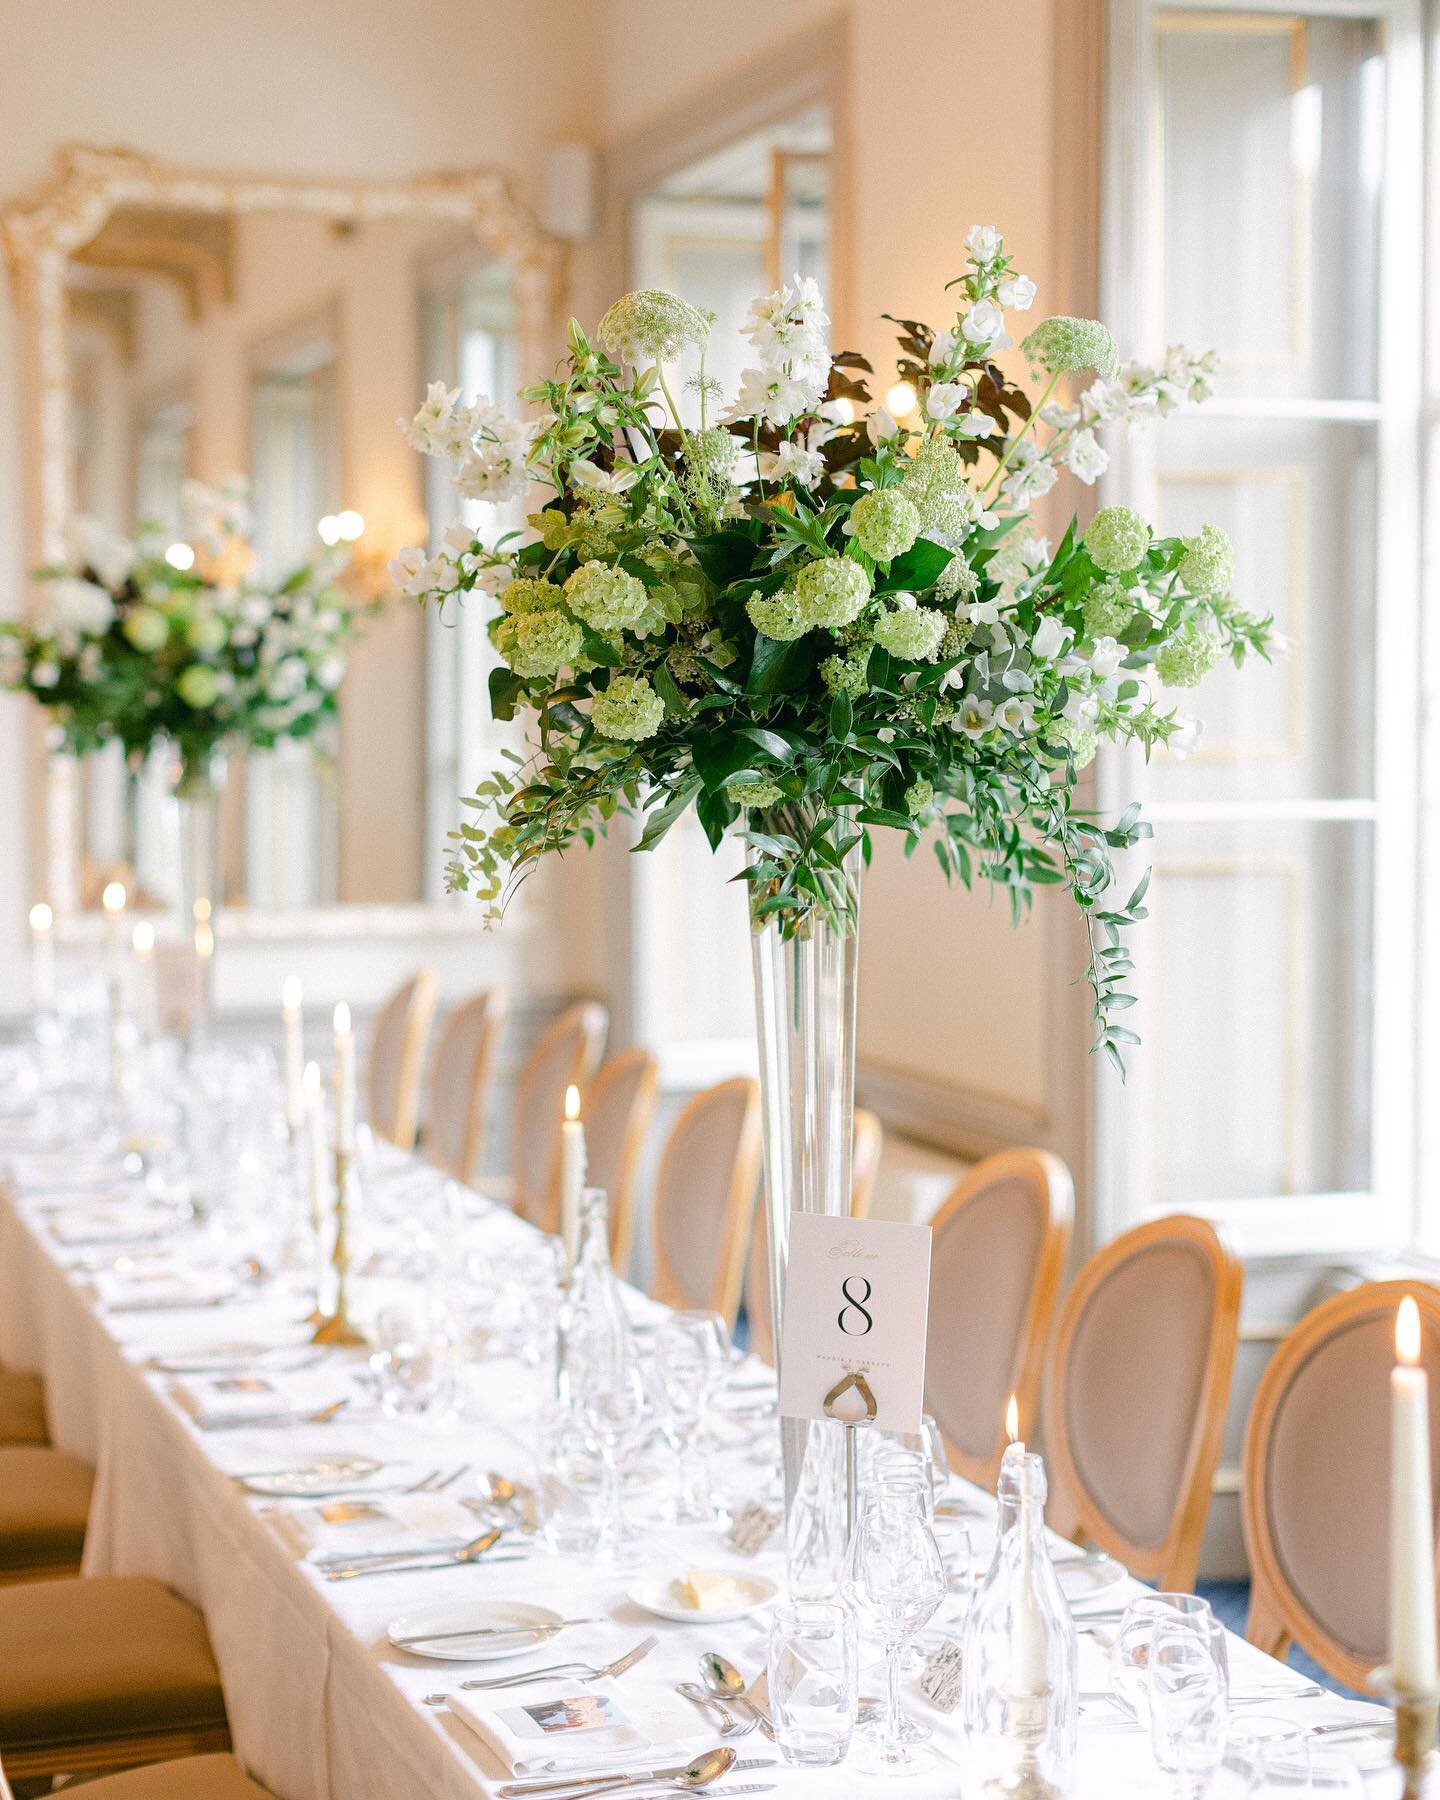 Elevated botanical glass vases for Destination couple Maggie and Garrett.🇺🇸

Pops of zingy viburnum snowballs ,campanula,delphinium,ammi and all the greens.🤍

Planning@waterlily weddings
Photographer @peter_carvill

#markreecastle #markreecastlewe